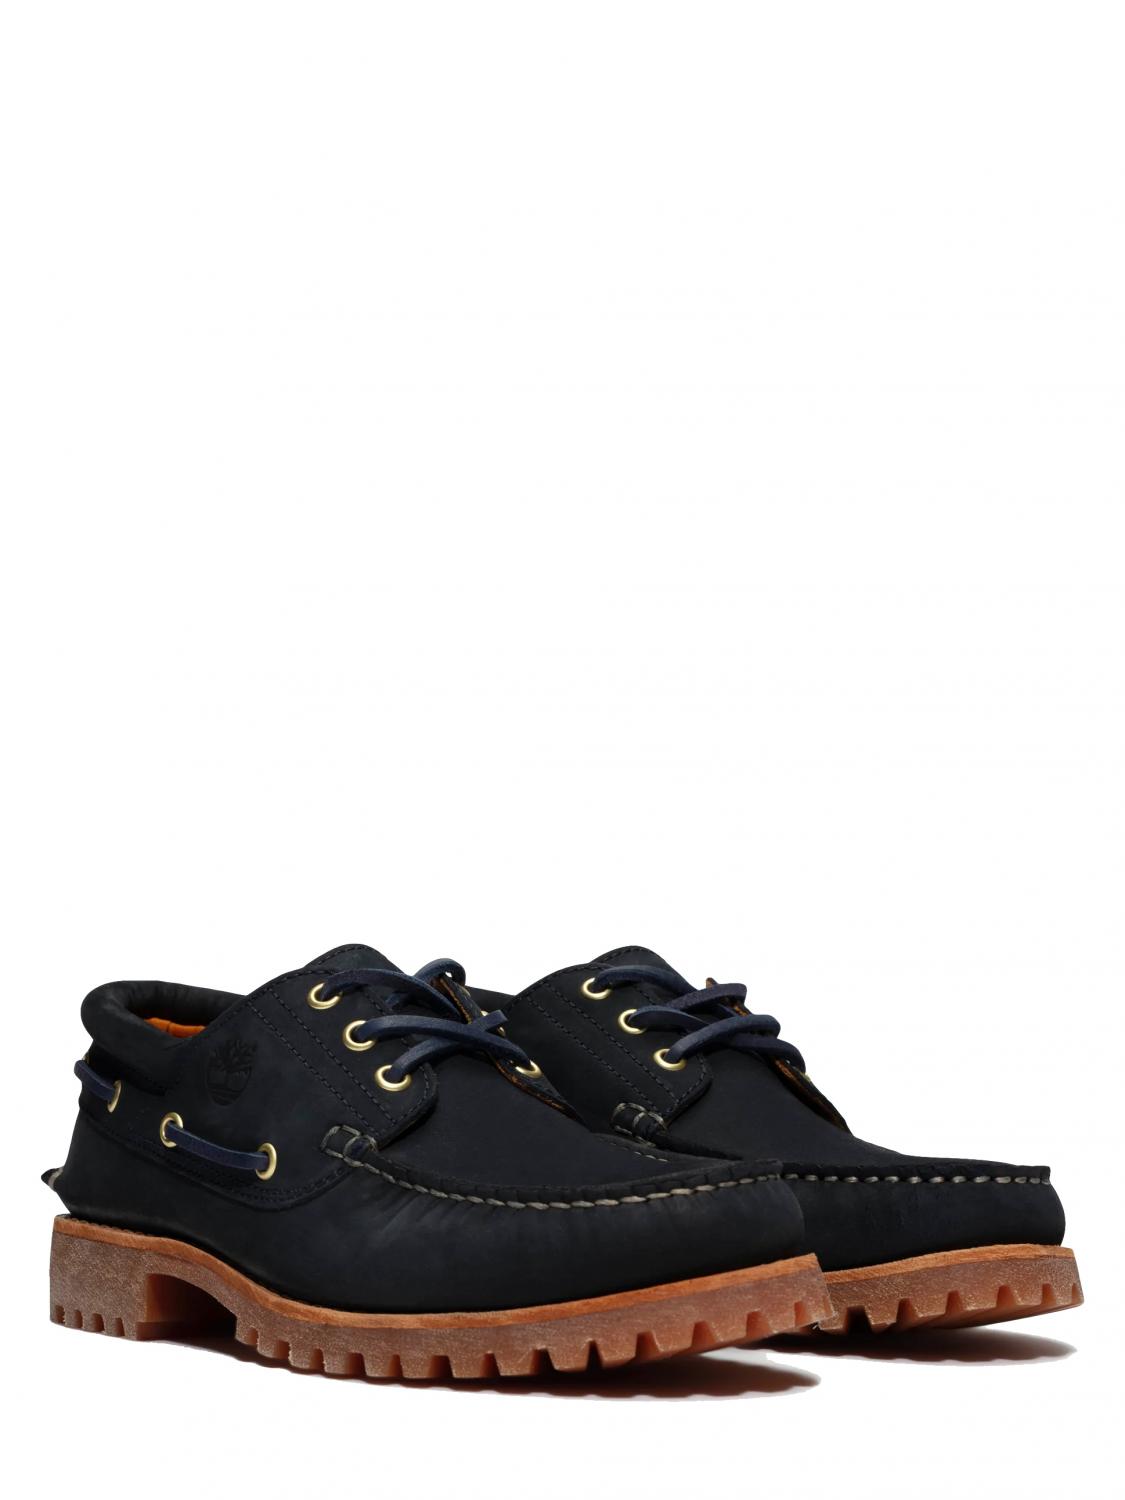 Timberland Authentics 3 Eye Classic Leather Boat Shoes